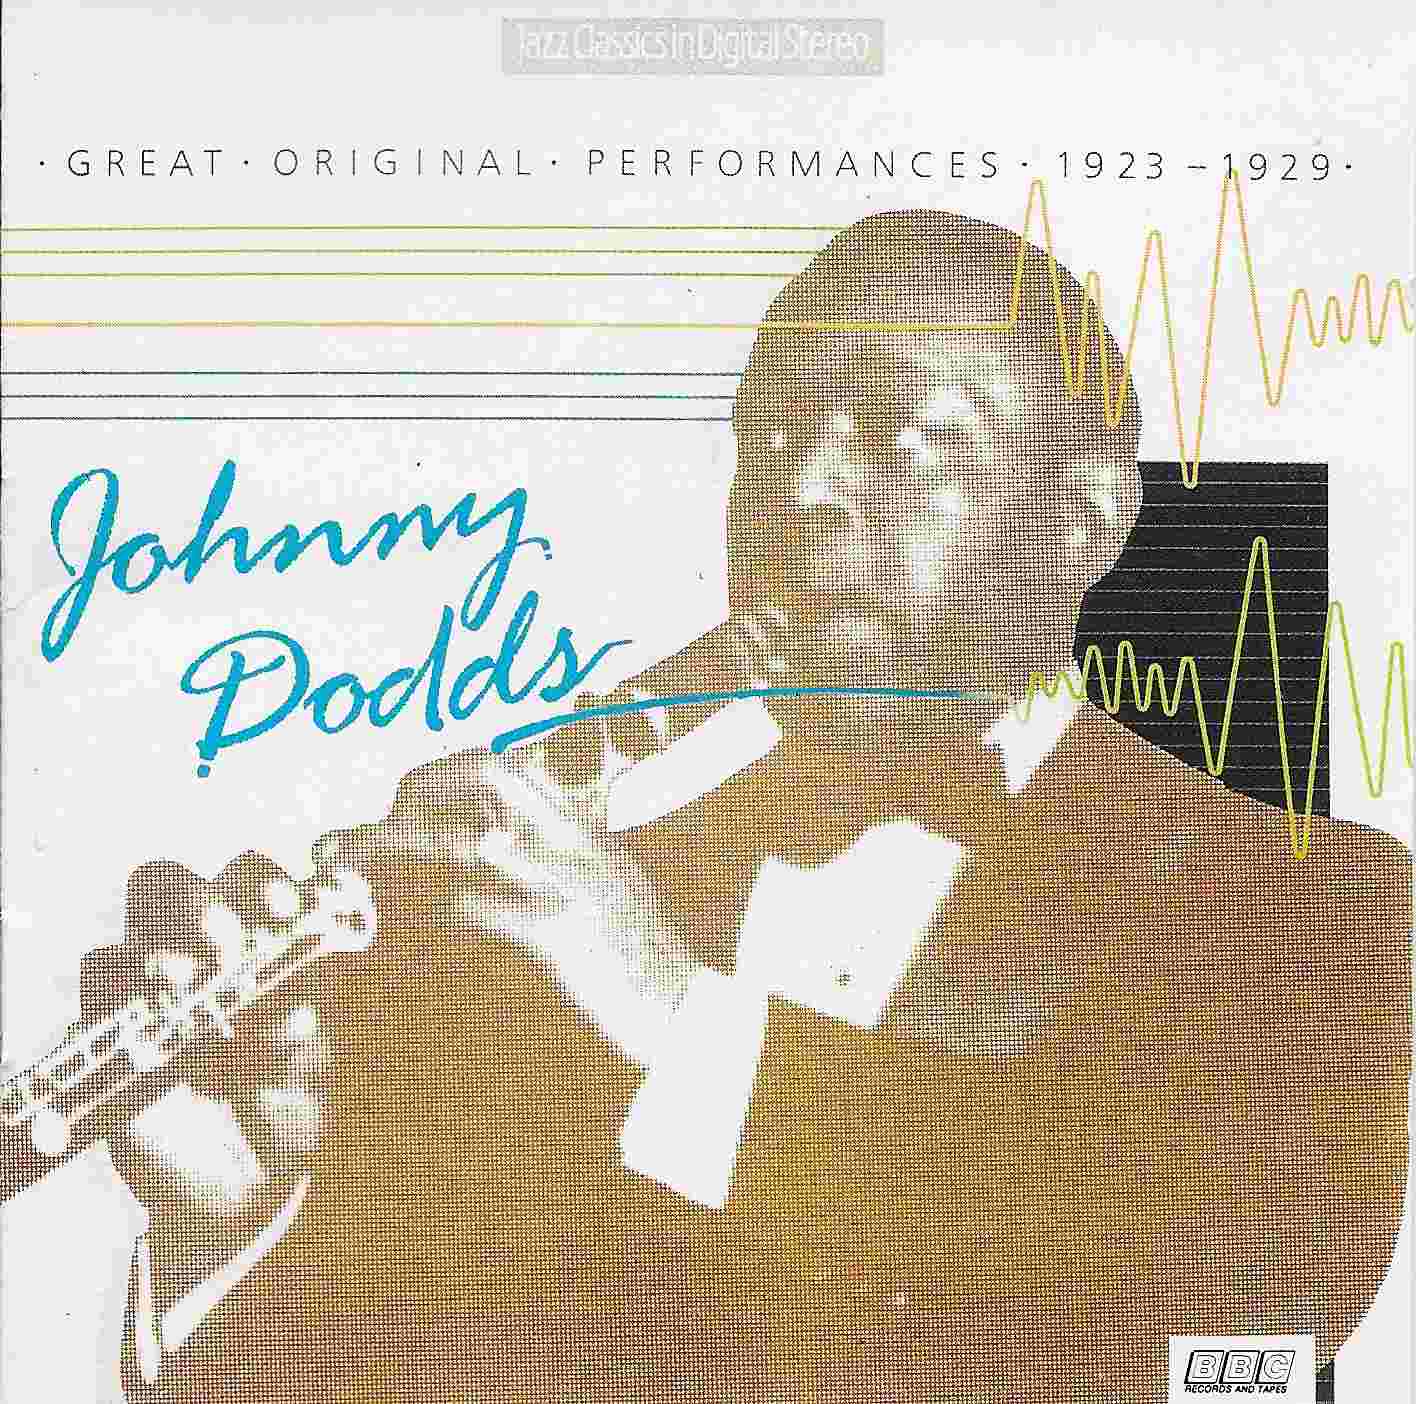 Picture of BBCCD603 Jazz Classics - Johnny Dodds by artist Johnny Dodds from the BBC cds - Records and Tapes library